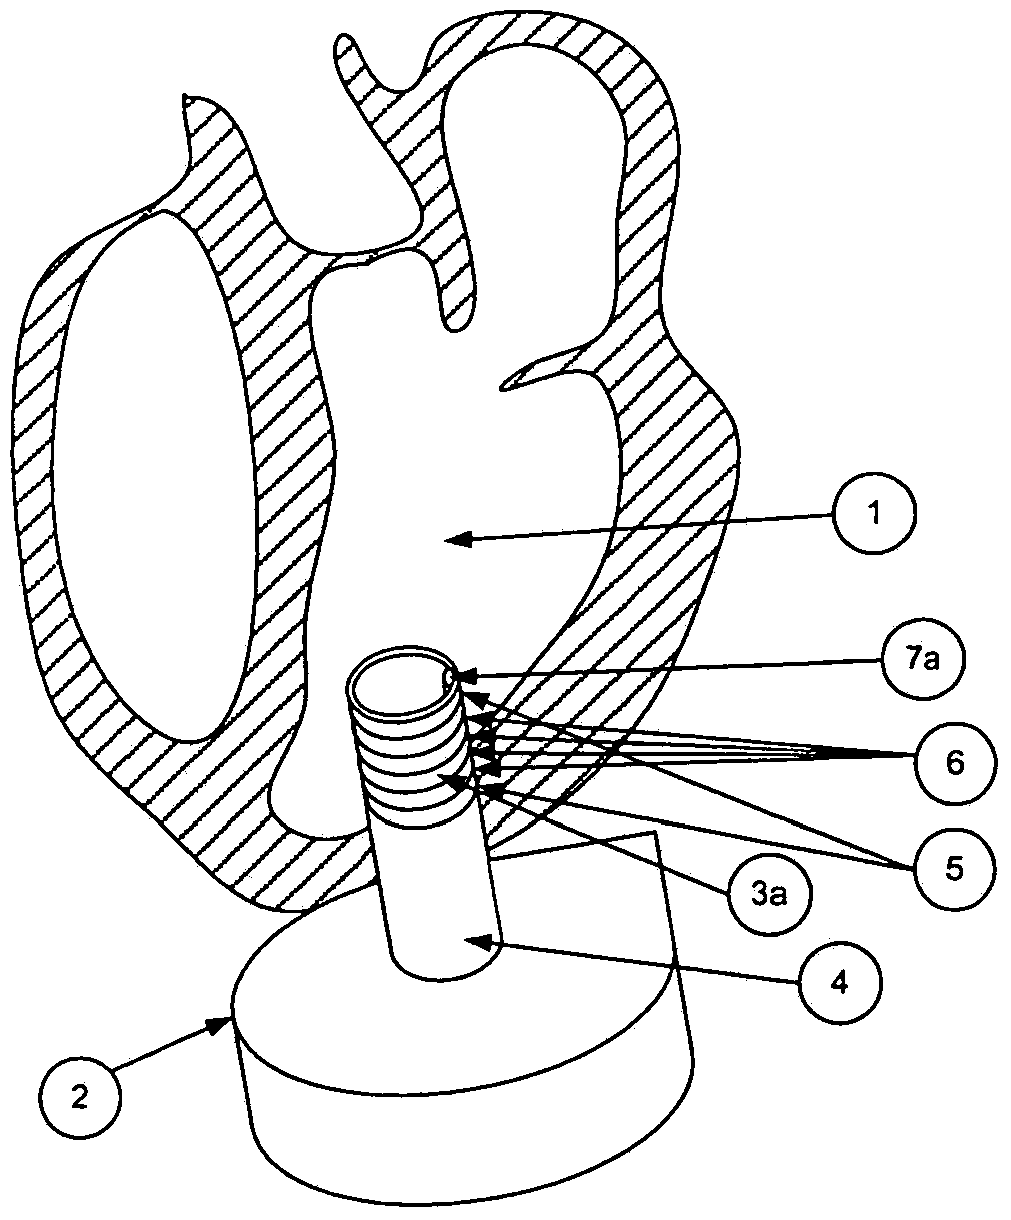 Blood withdrawal cannula of a pump replacing or assisting activity of the heart